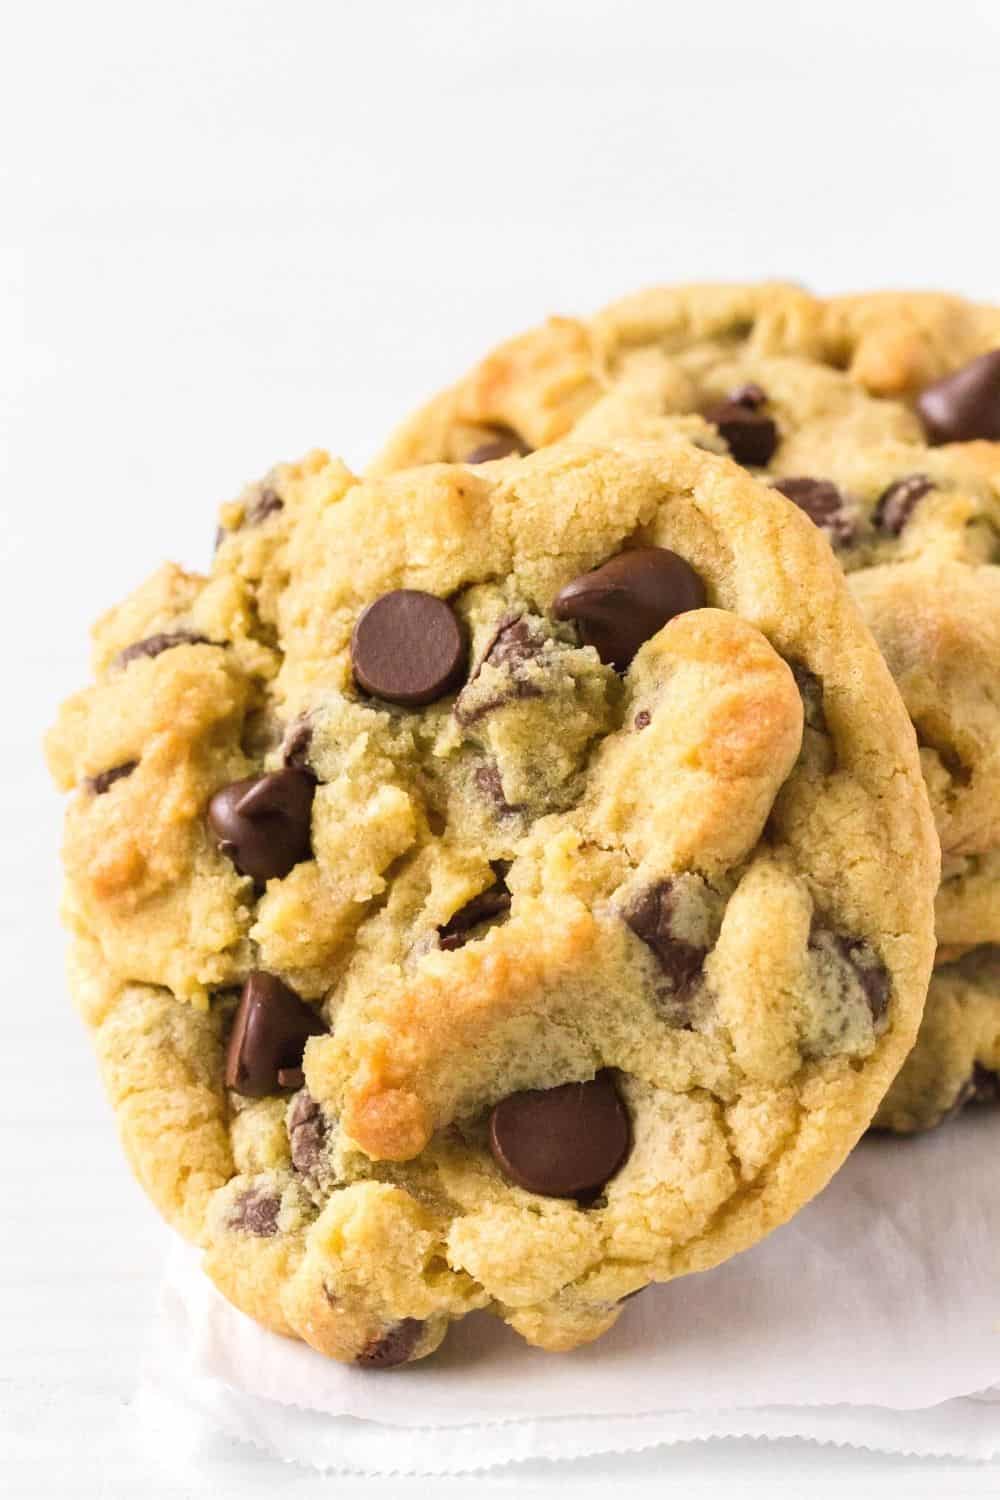 close-up of a golden-brown chocolate chip cookie